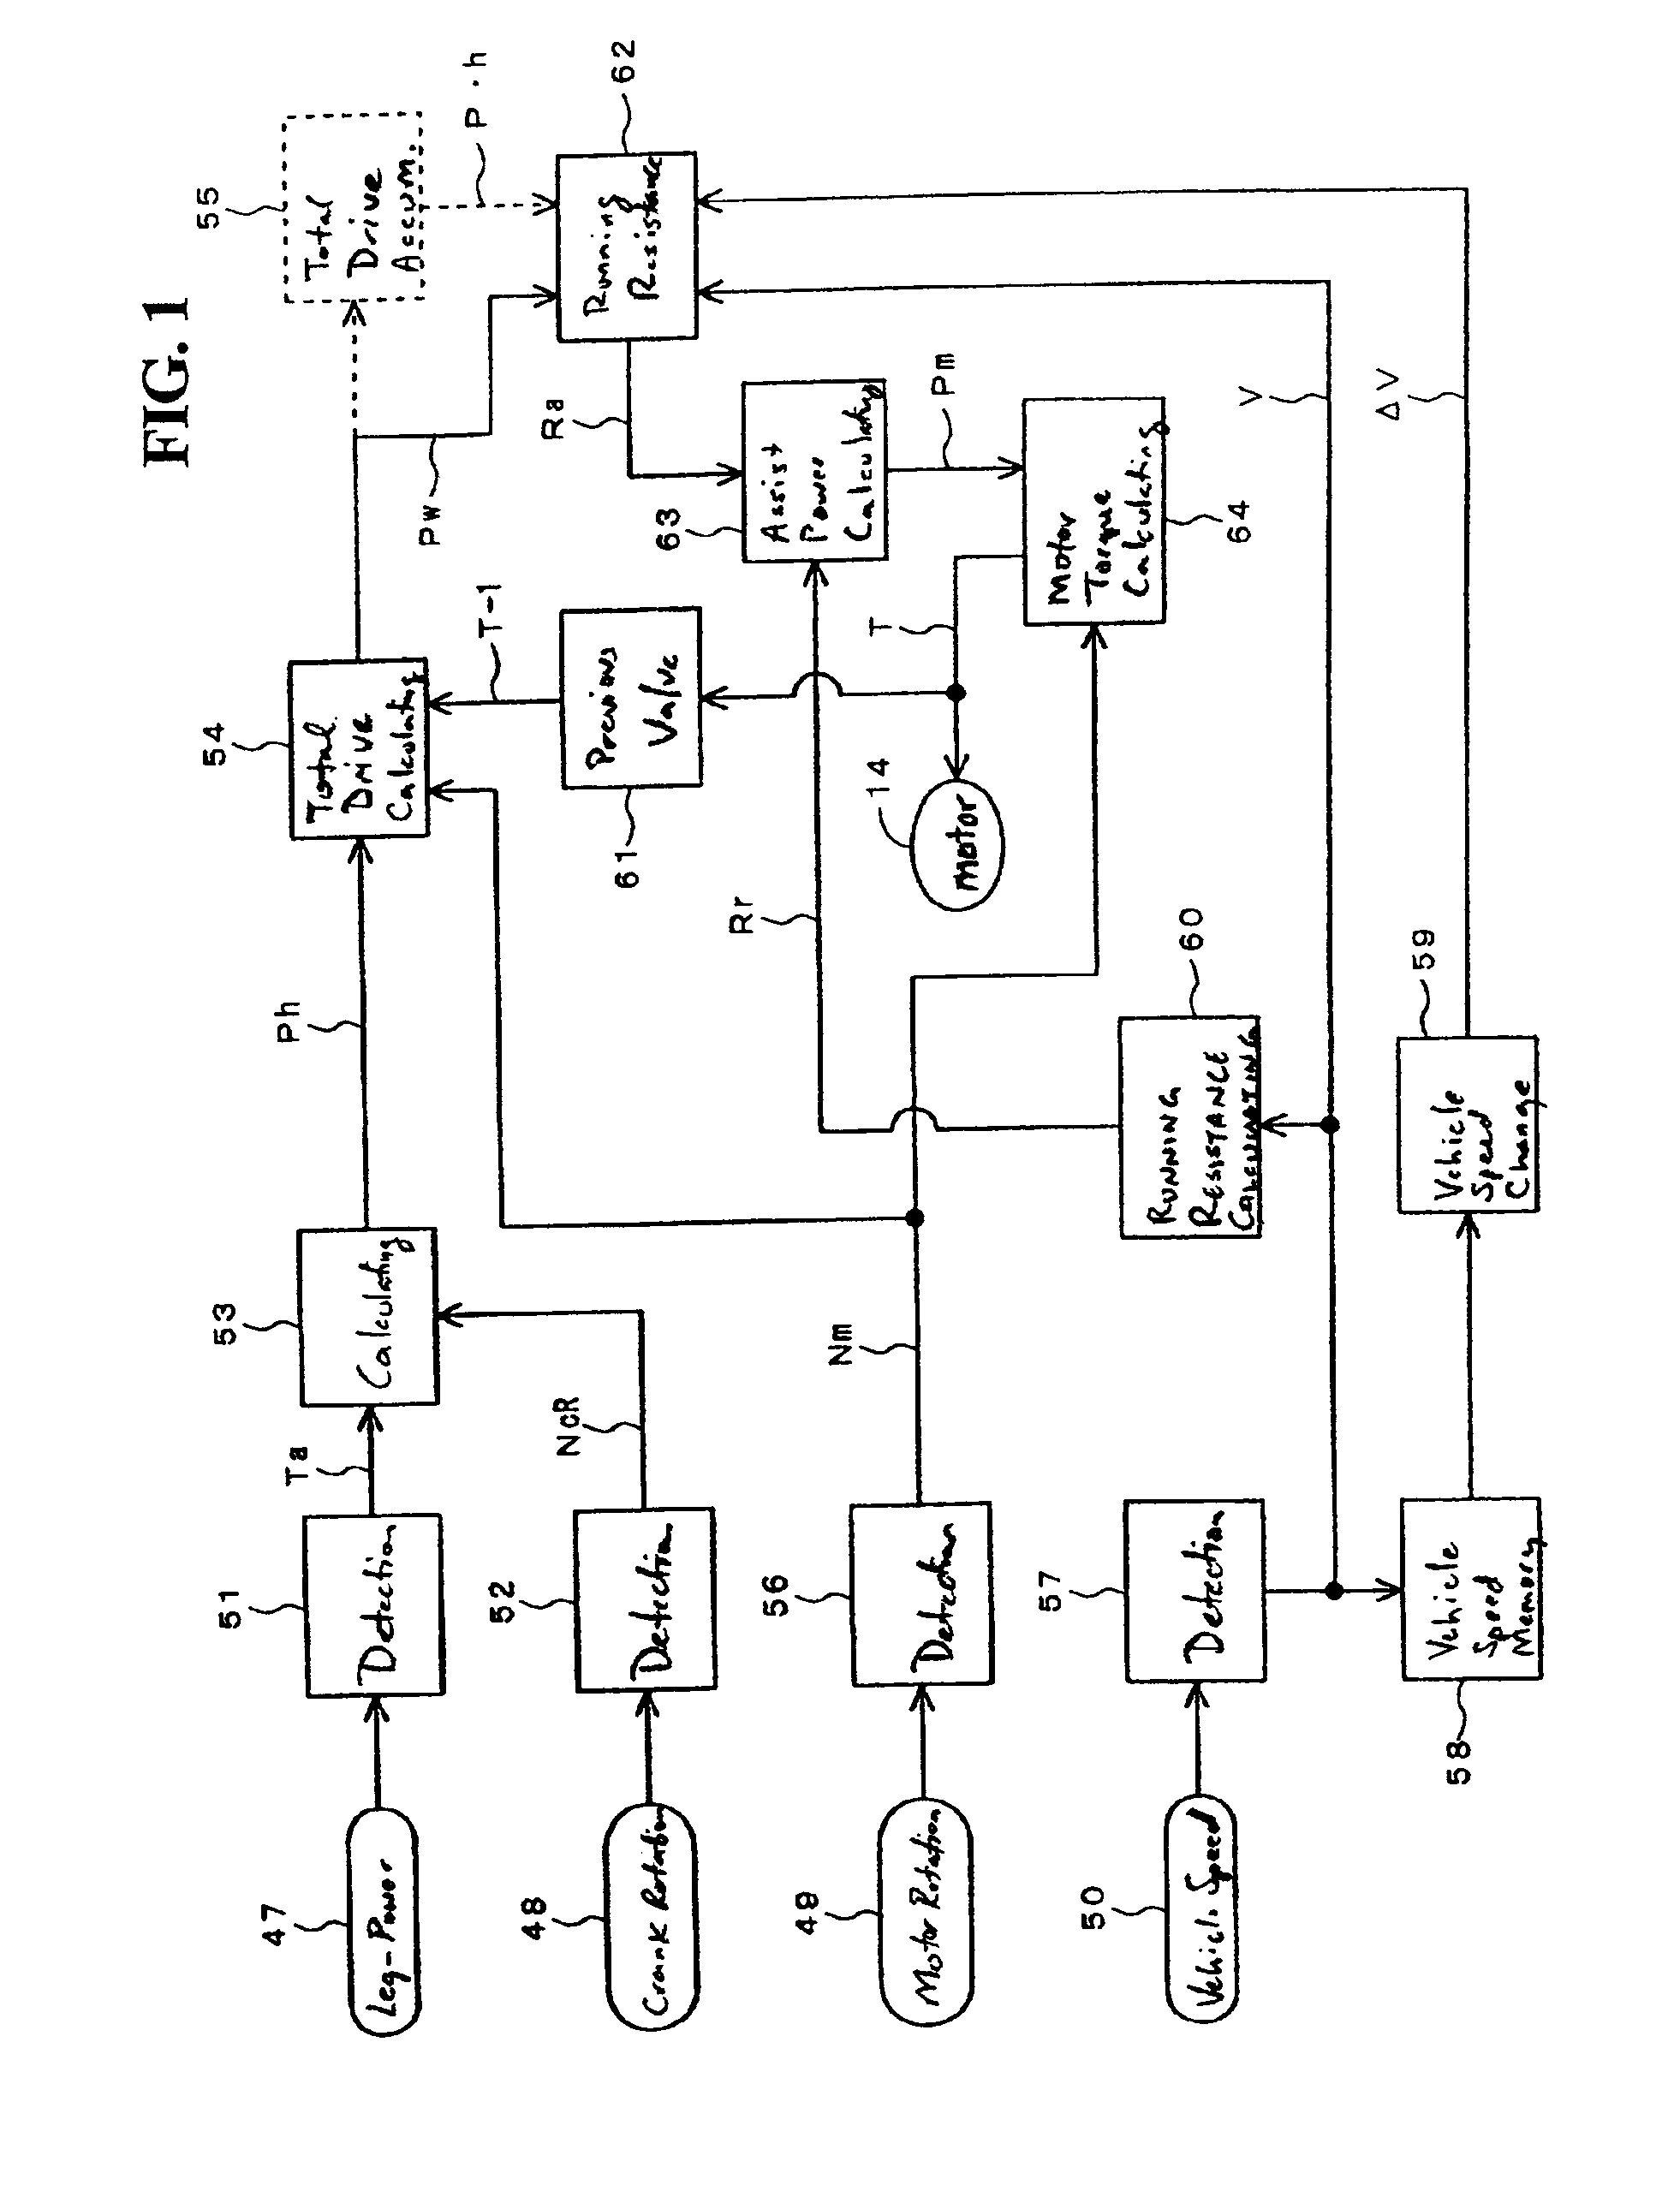 Control unit for motor-assisted bicycle